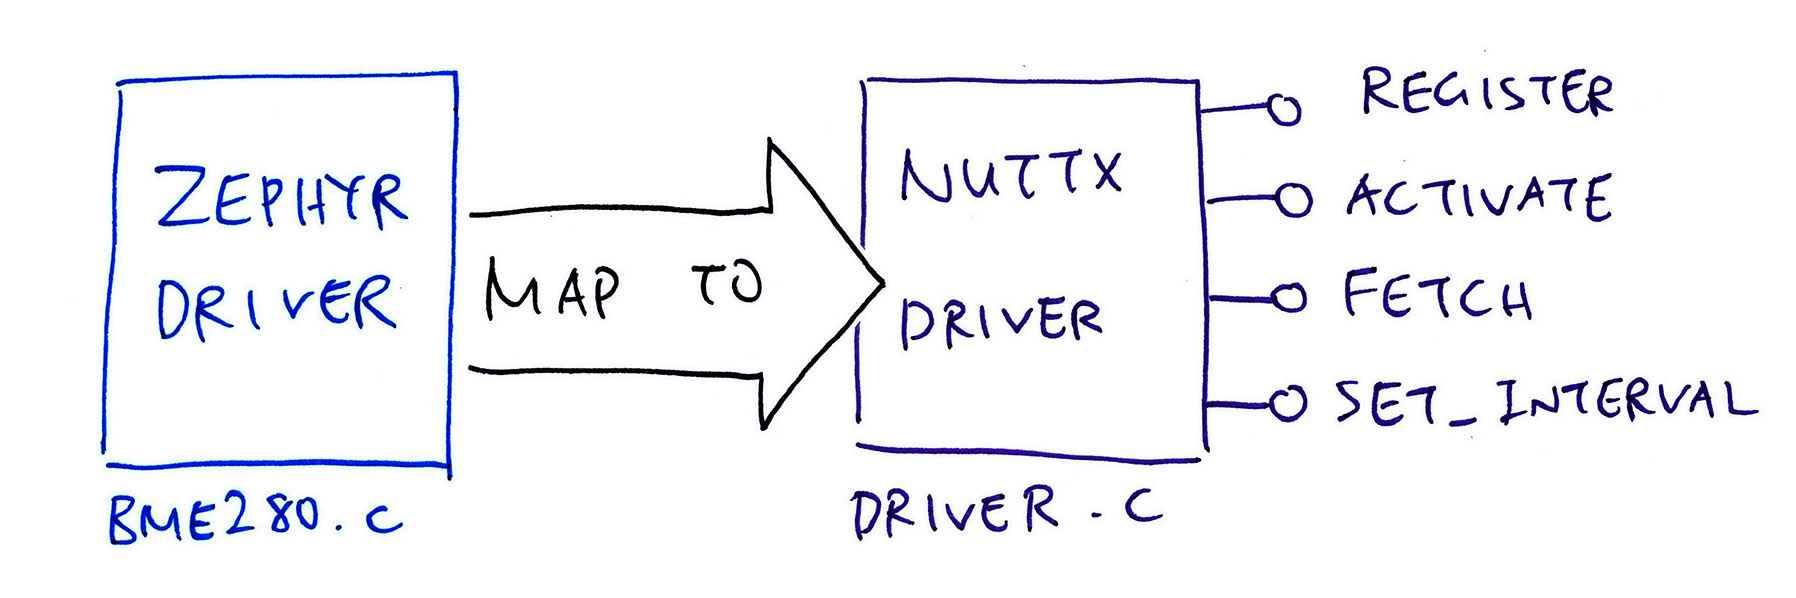 Zephyr BME280 Driver mapped to NuttX Driver